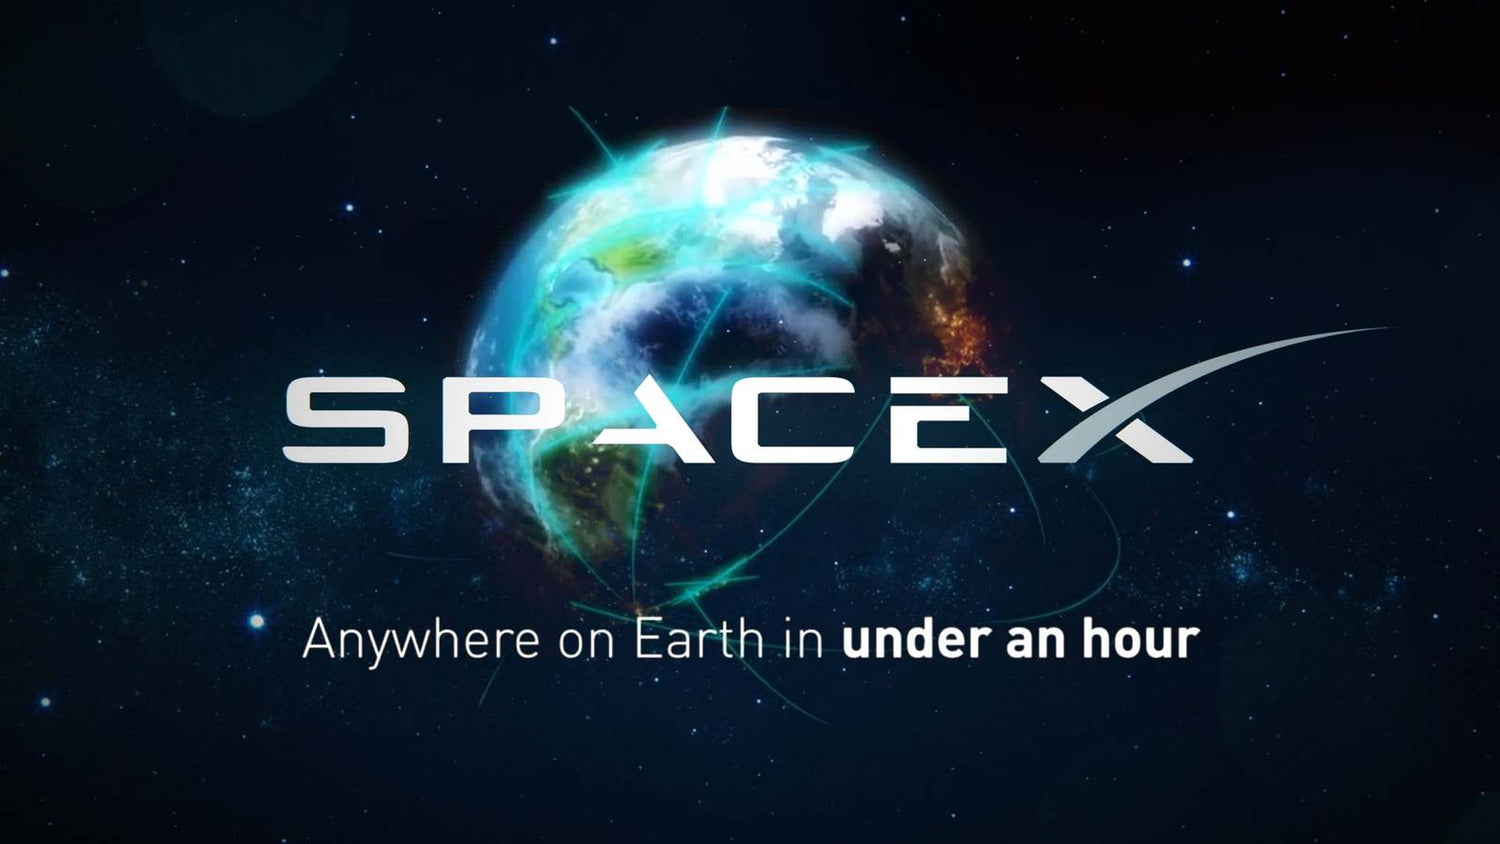 SpaceX aims to launch you aboard Starship anywhere on Earth in under an hour!